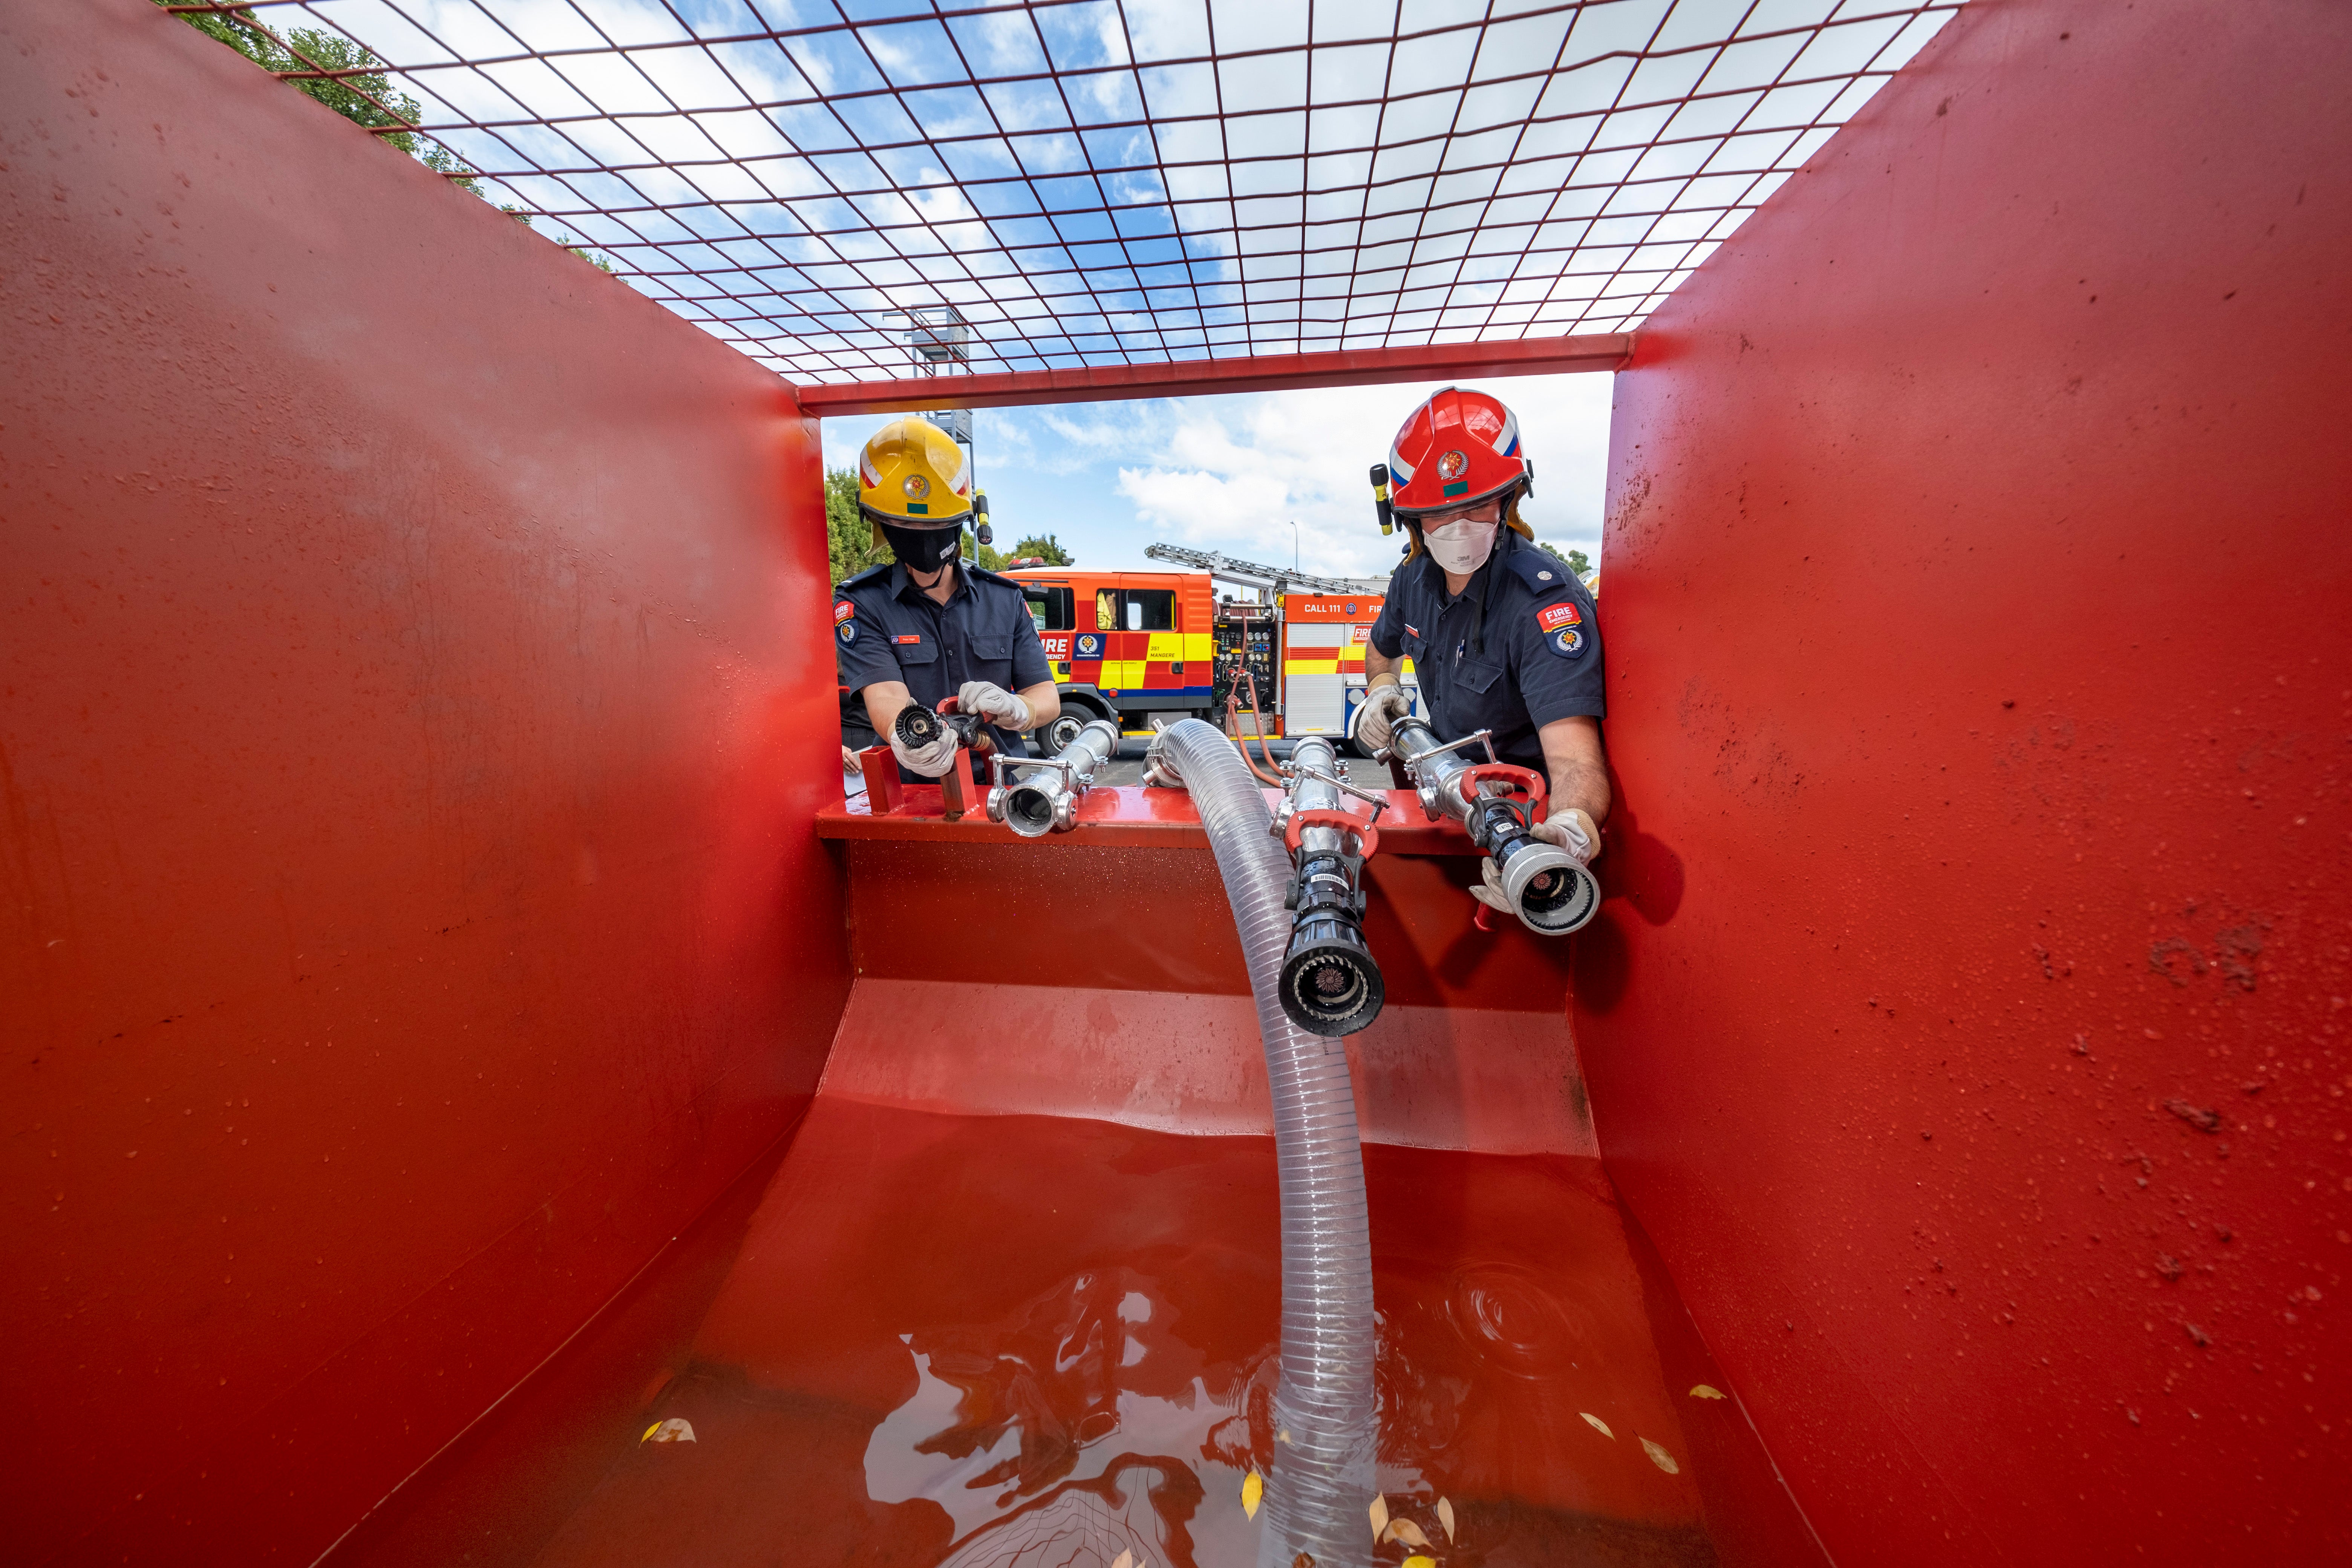 Auckland firefighters using recycled water in modified skip bins for training